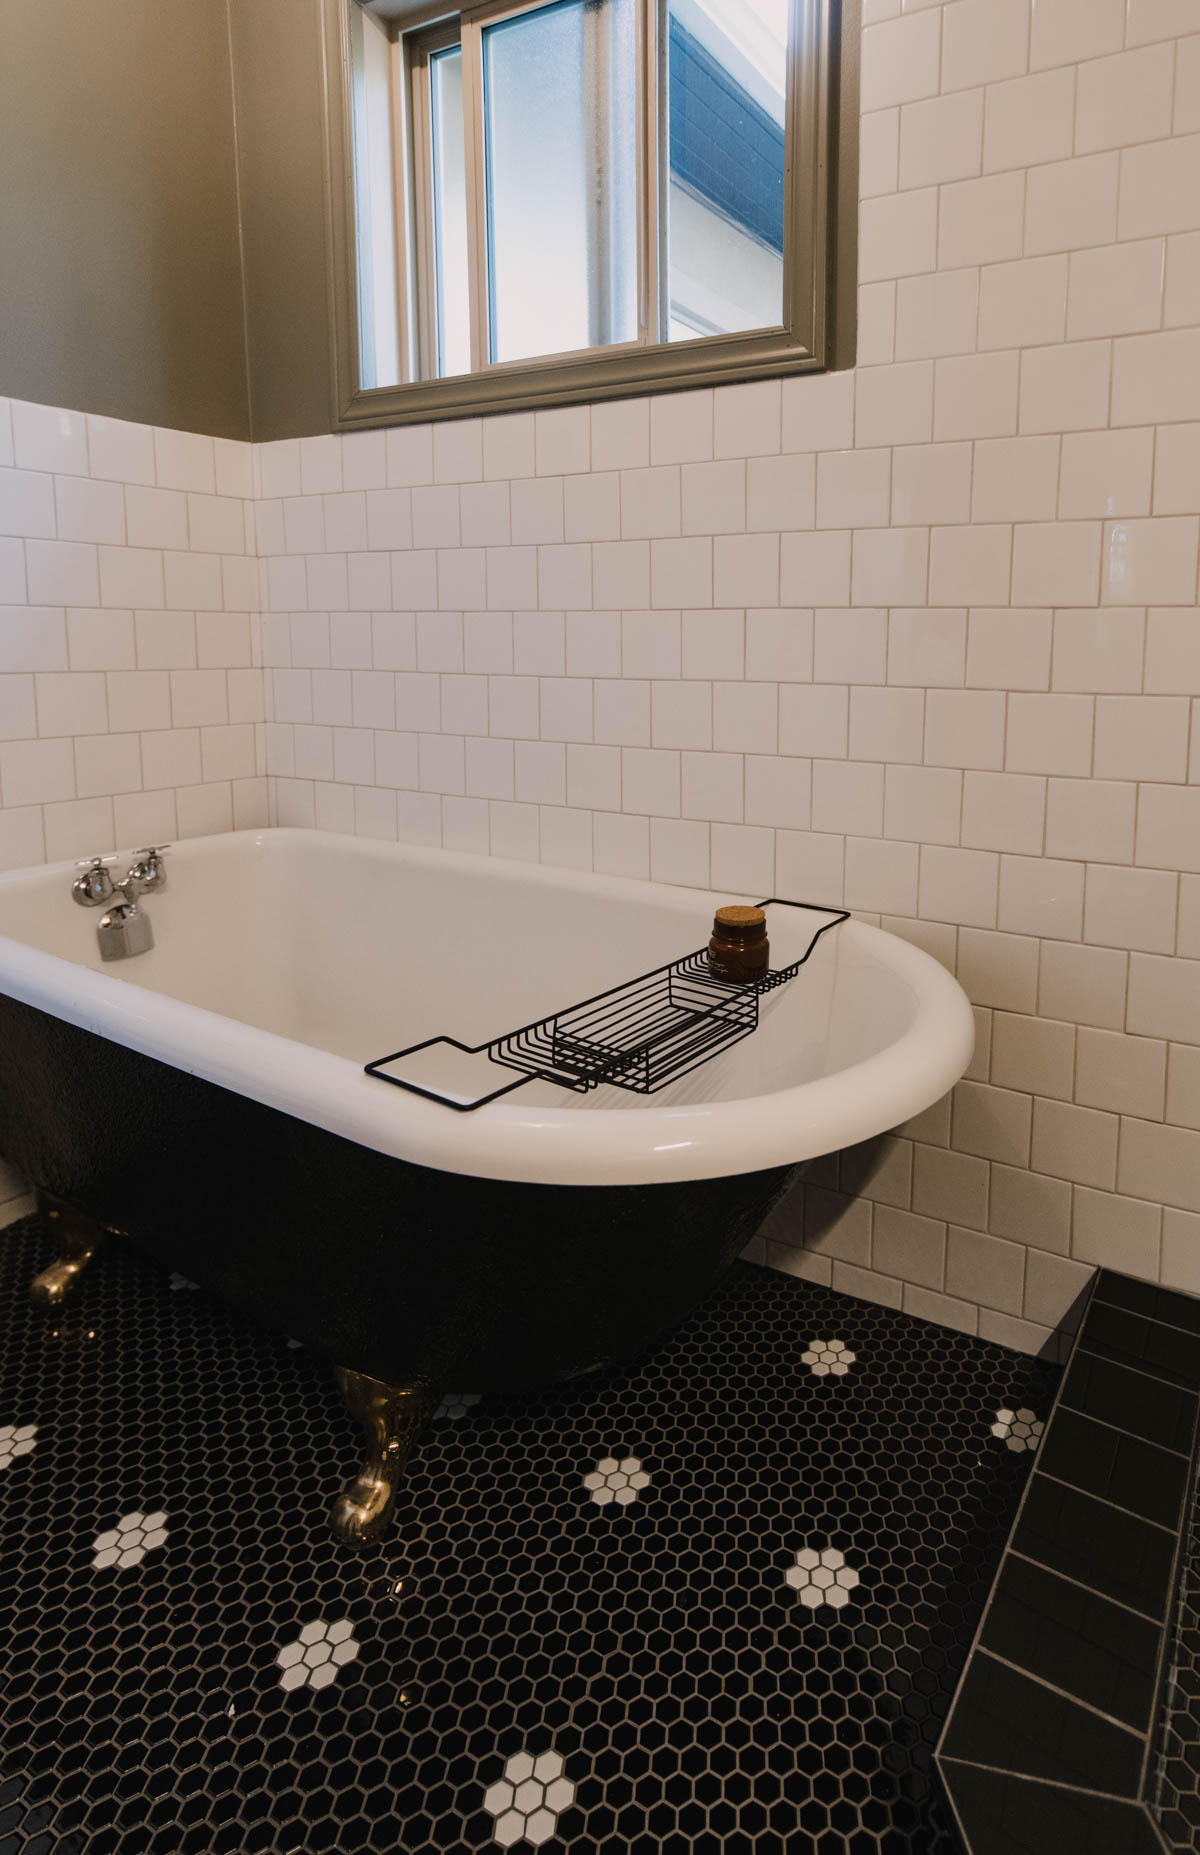 Original Claw foot tub reused in classic modern bathroom makeover